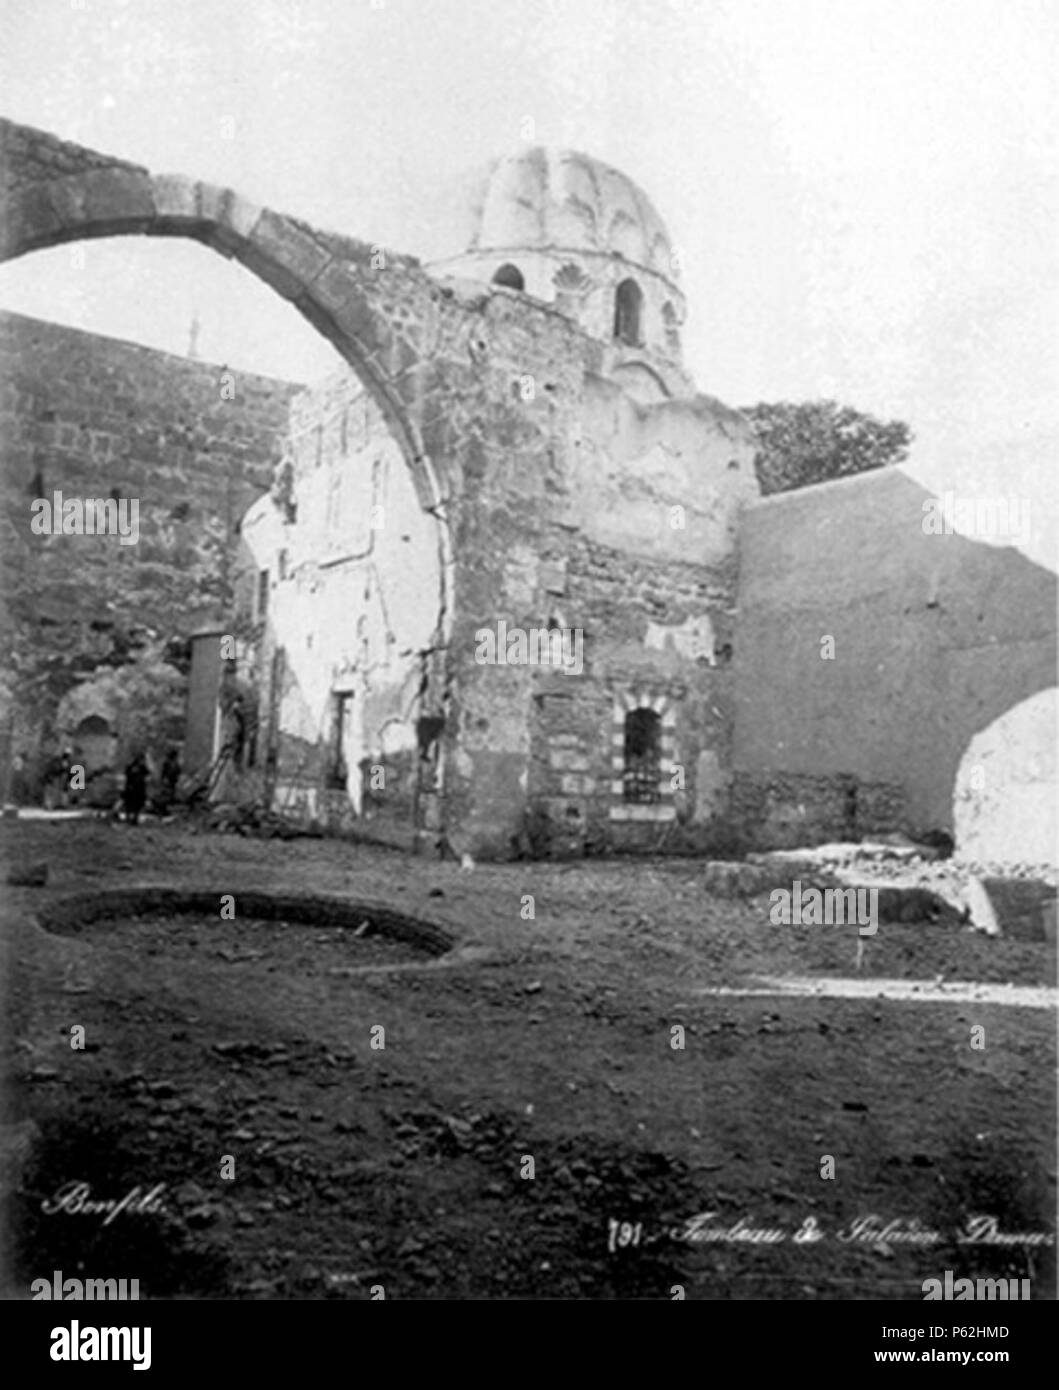 N/A. English: Saladin's Mausoleum in Damascus. Français : Tombeau de Saladin à Damas. :        . between 1831 and 1885.   Félix Bonfils  (1831–1885)     Alternative names Maison Bonfils, F. Bonfils et Cie (studio name)  Description French photographer  Date of birth/death 8 March 1831 1885  Location of birth/death Saint-Hippolyte-du-Fort, France Alès, France  Work period especially from 1867 to his death (1885)  Work location Ottoman Empire, Lebanon, Syria and Palestine  Authority control  : Q2915801 VIAF:54136350 ISNI:0000 0001 2133 3451 ULAN:500016696 LCCN:n87127847 Open Library:OL6397443A W Stock Photo